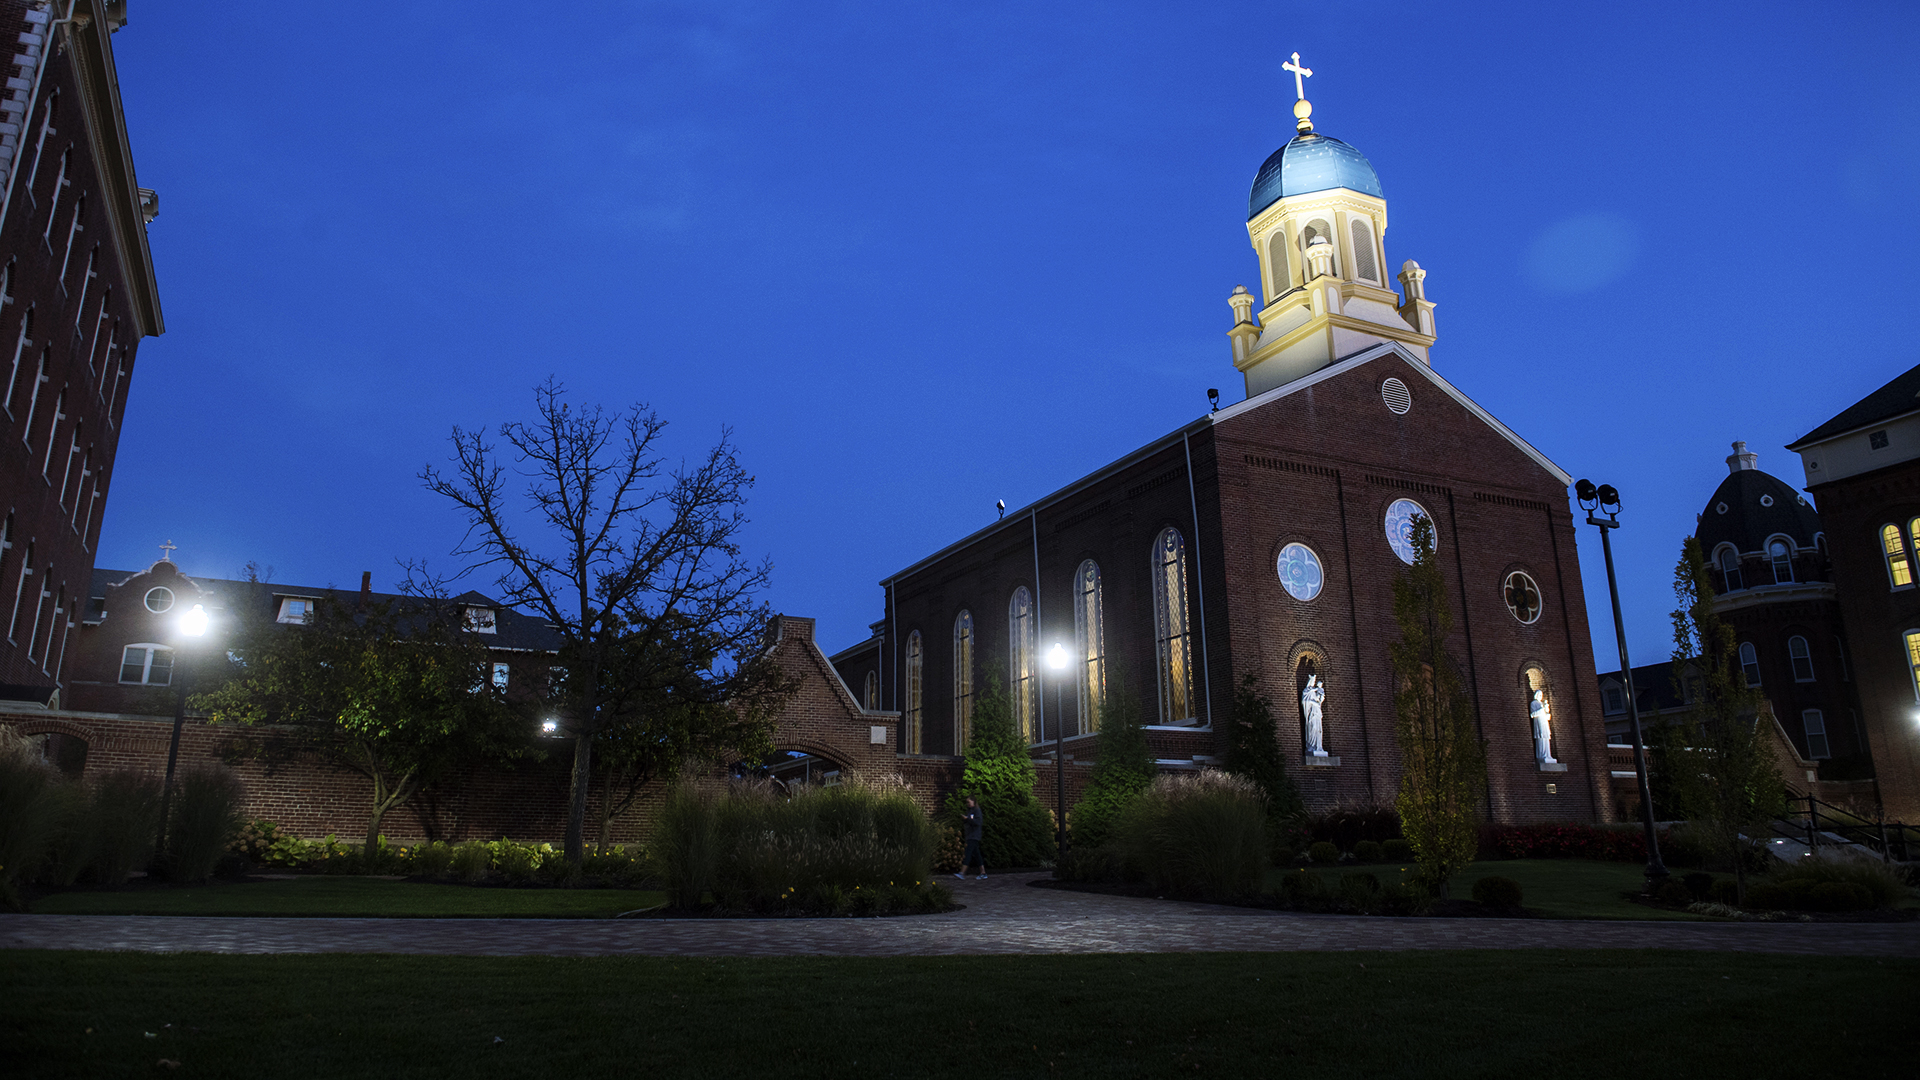 Background Image: Immaculate Conception Chapel at Dusk by University of Dayton